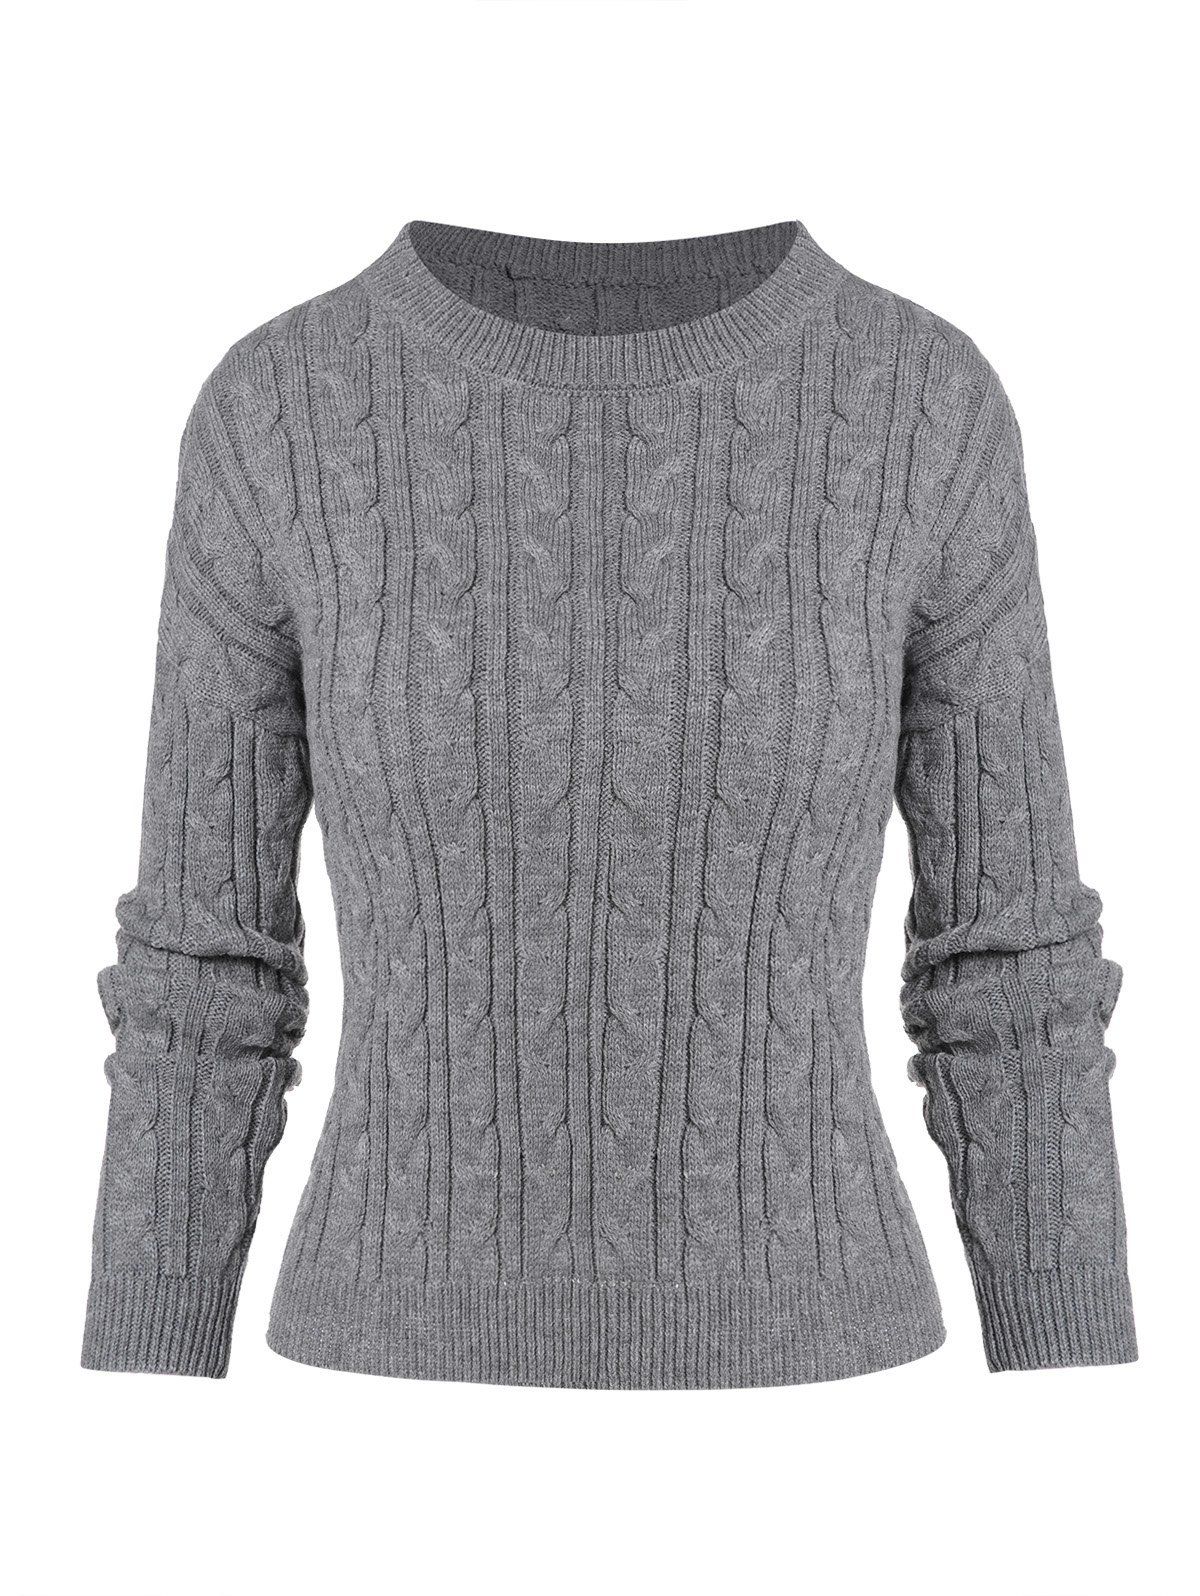 Cable Knitted Pullover Solid Sweater - GRAY L